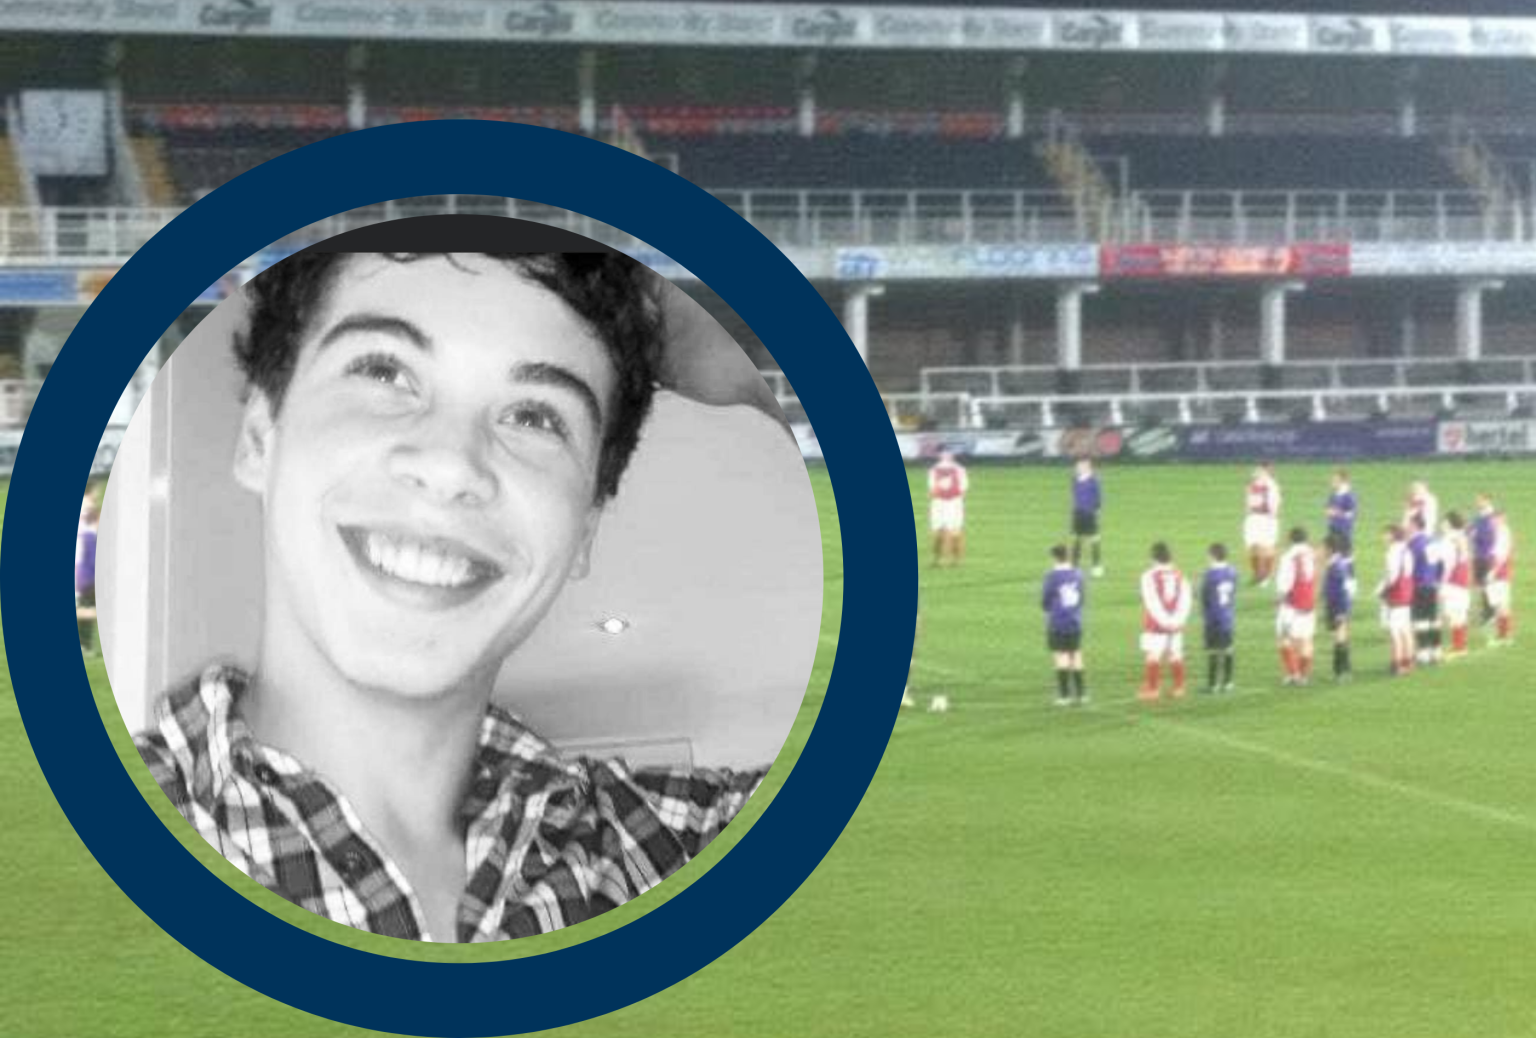 NEWS | Memorial match this evening to mark ten years since Herefordshire teenager died